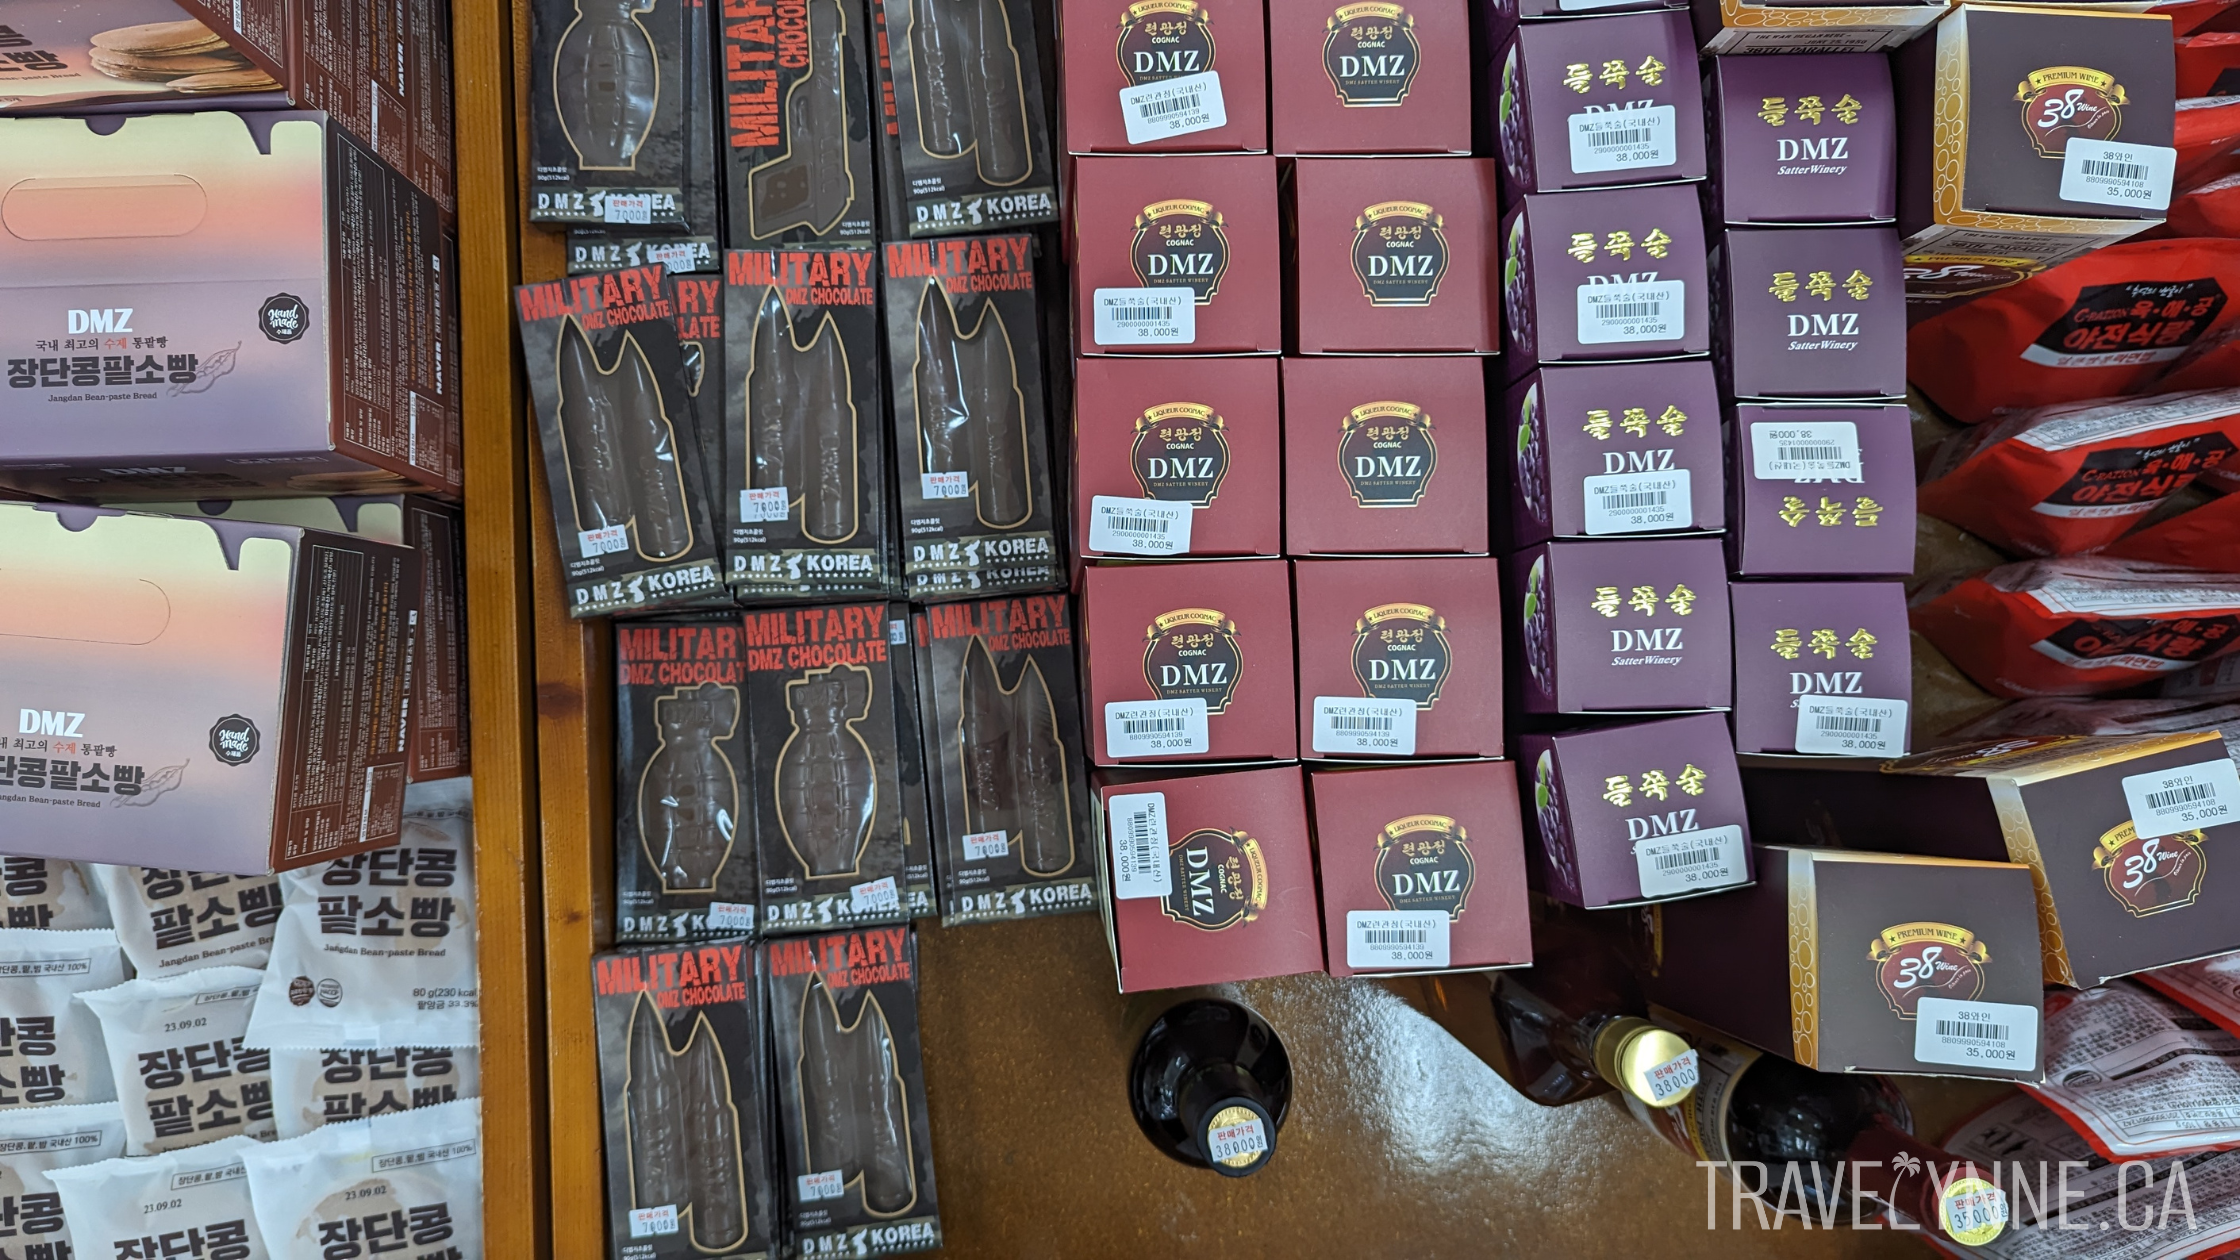 DMZ gift shop merchandise including DMZ chocolate in the shape of bullets and grenades.